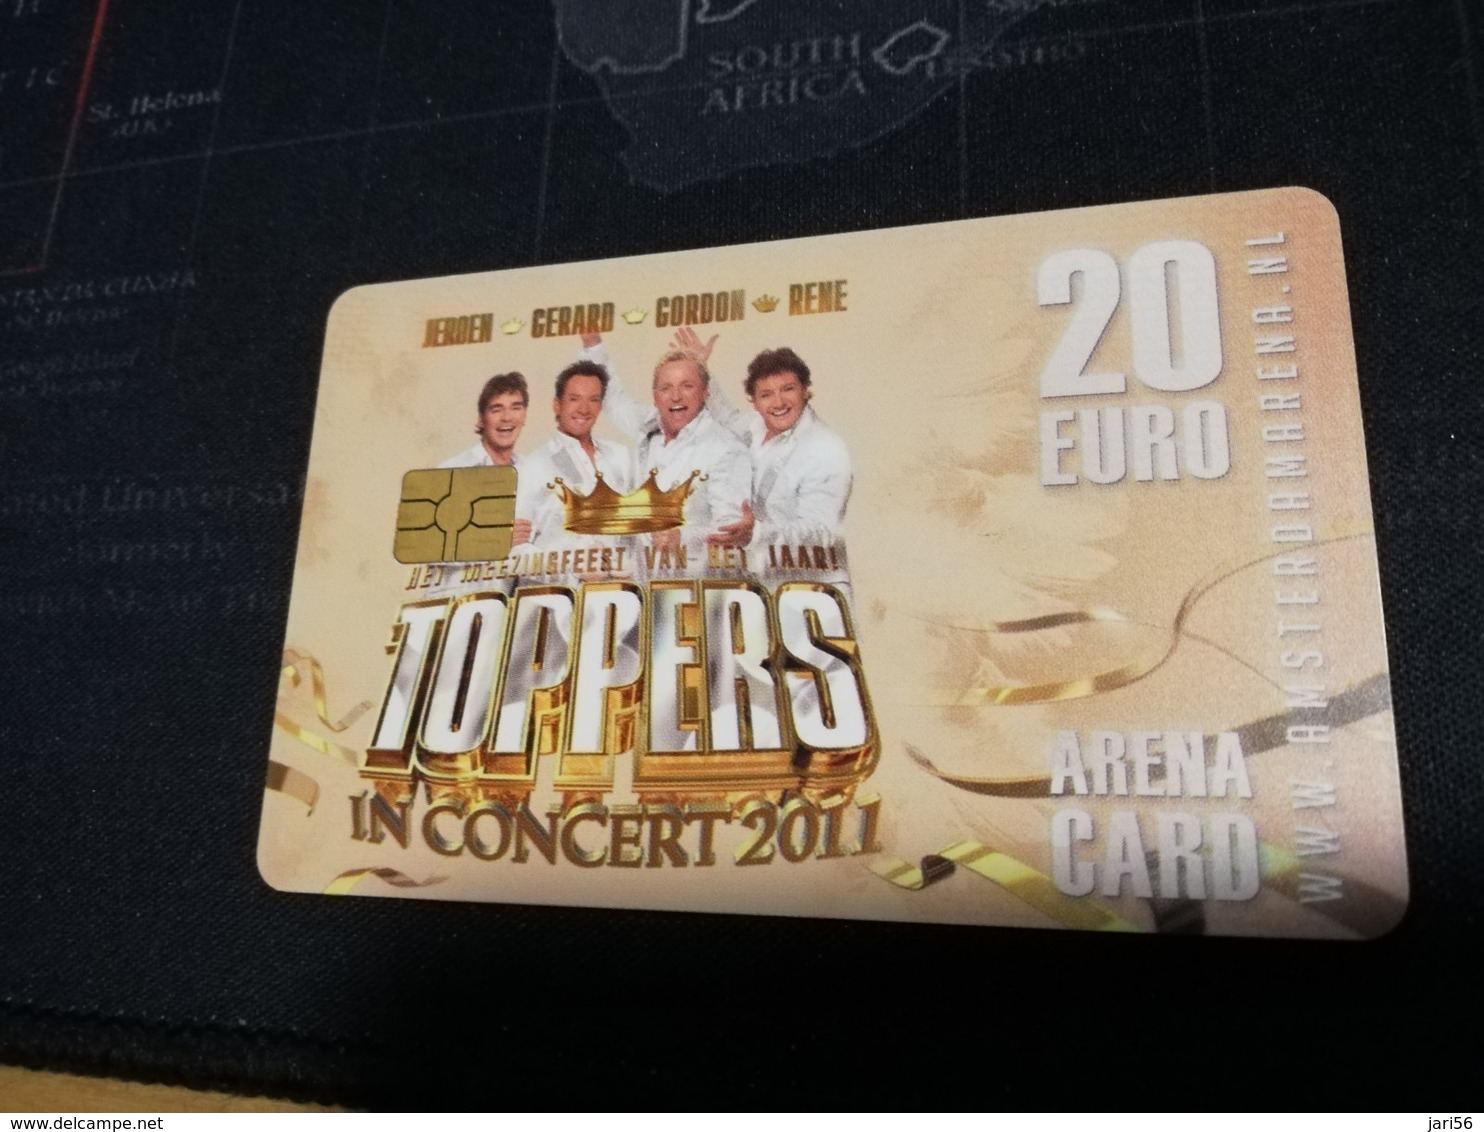 NETHERLANDS  ARENA CARD  TOPPERS IN CONCERT 2011     €20- USED CARD  ** 1437** - Public